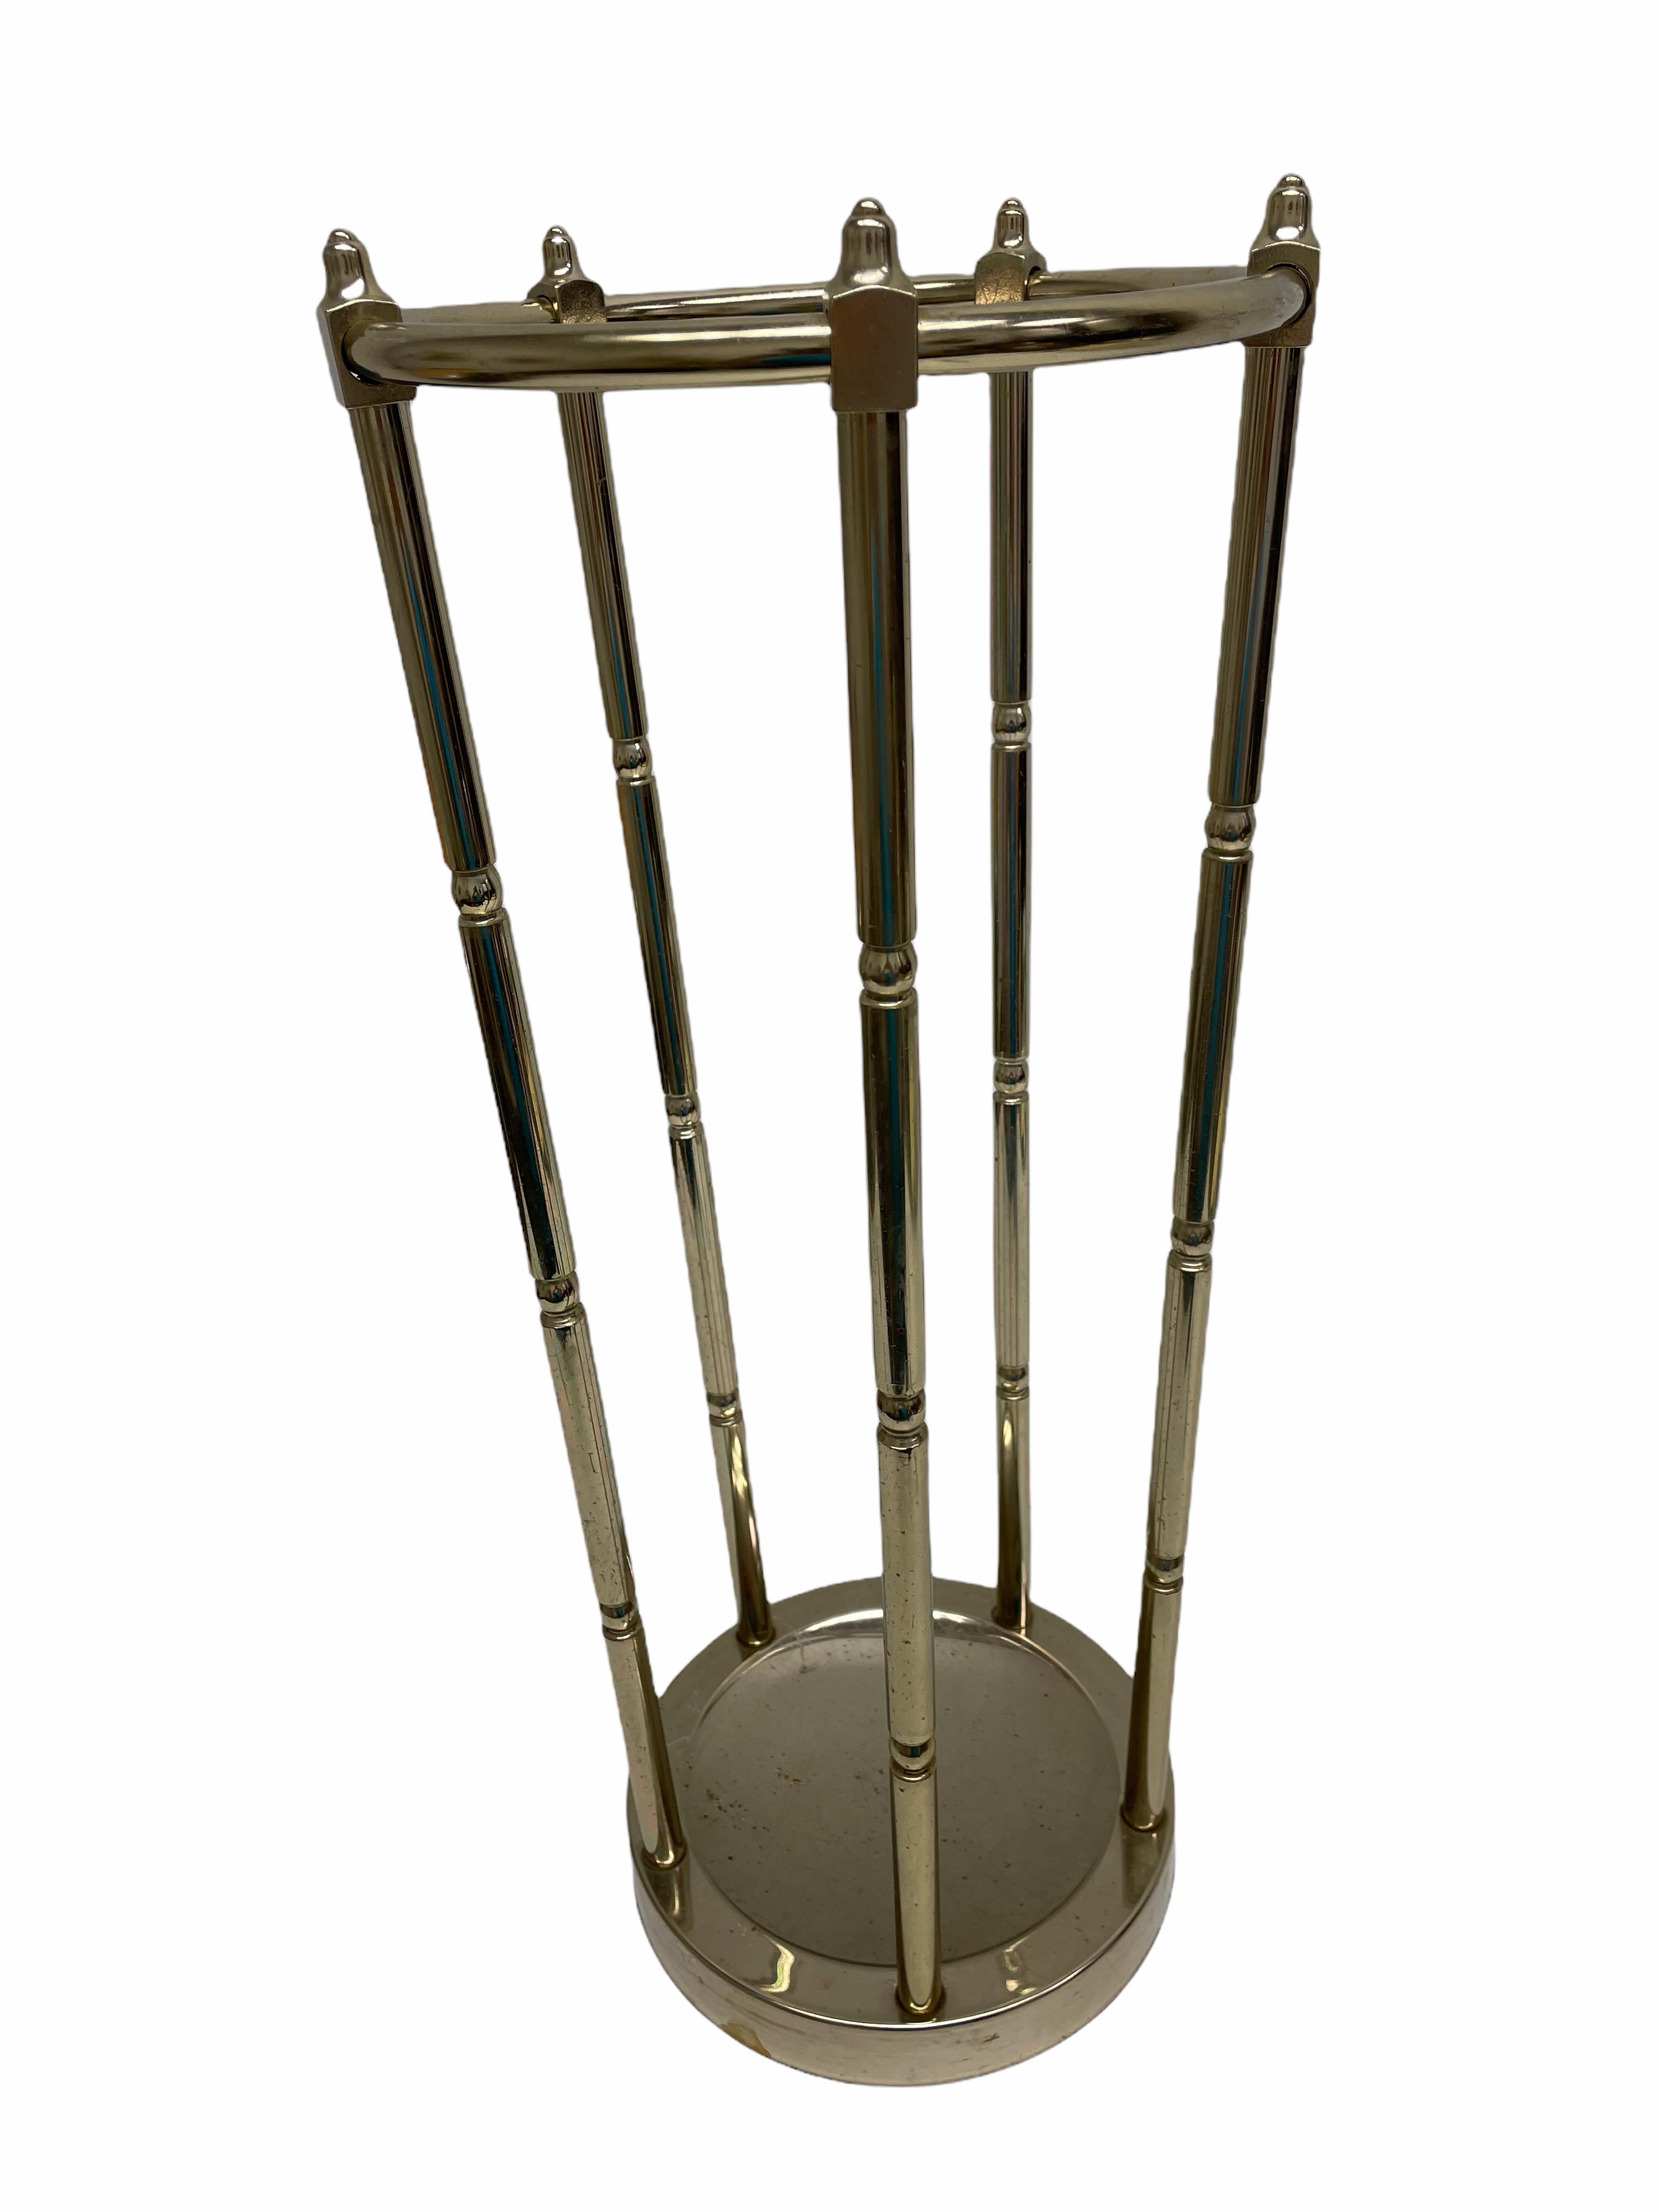 An amazing Mid-Century Modern umbrella stand purchased on an estate sale in Vienna Austria. We believe it is nickel plated and made in the 1960s. This is a beautiful all original item in good condition. It has some signs of use, scratches to the